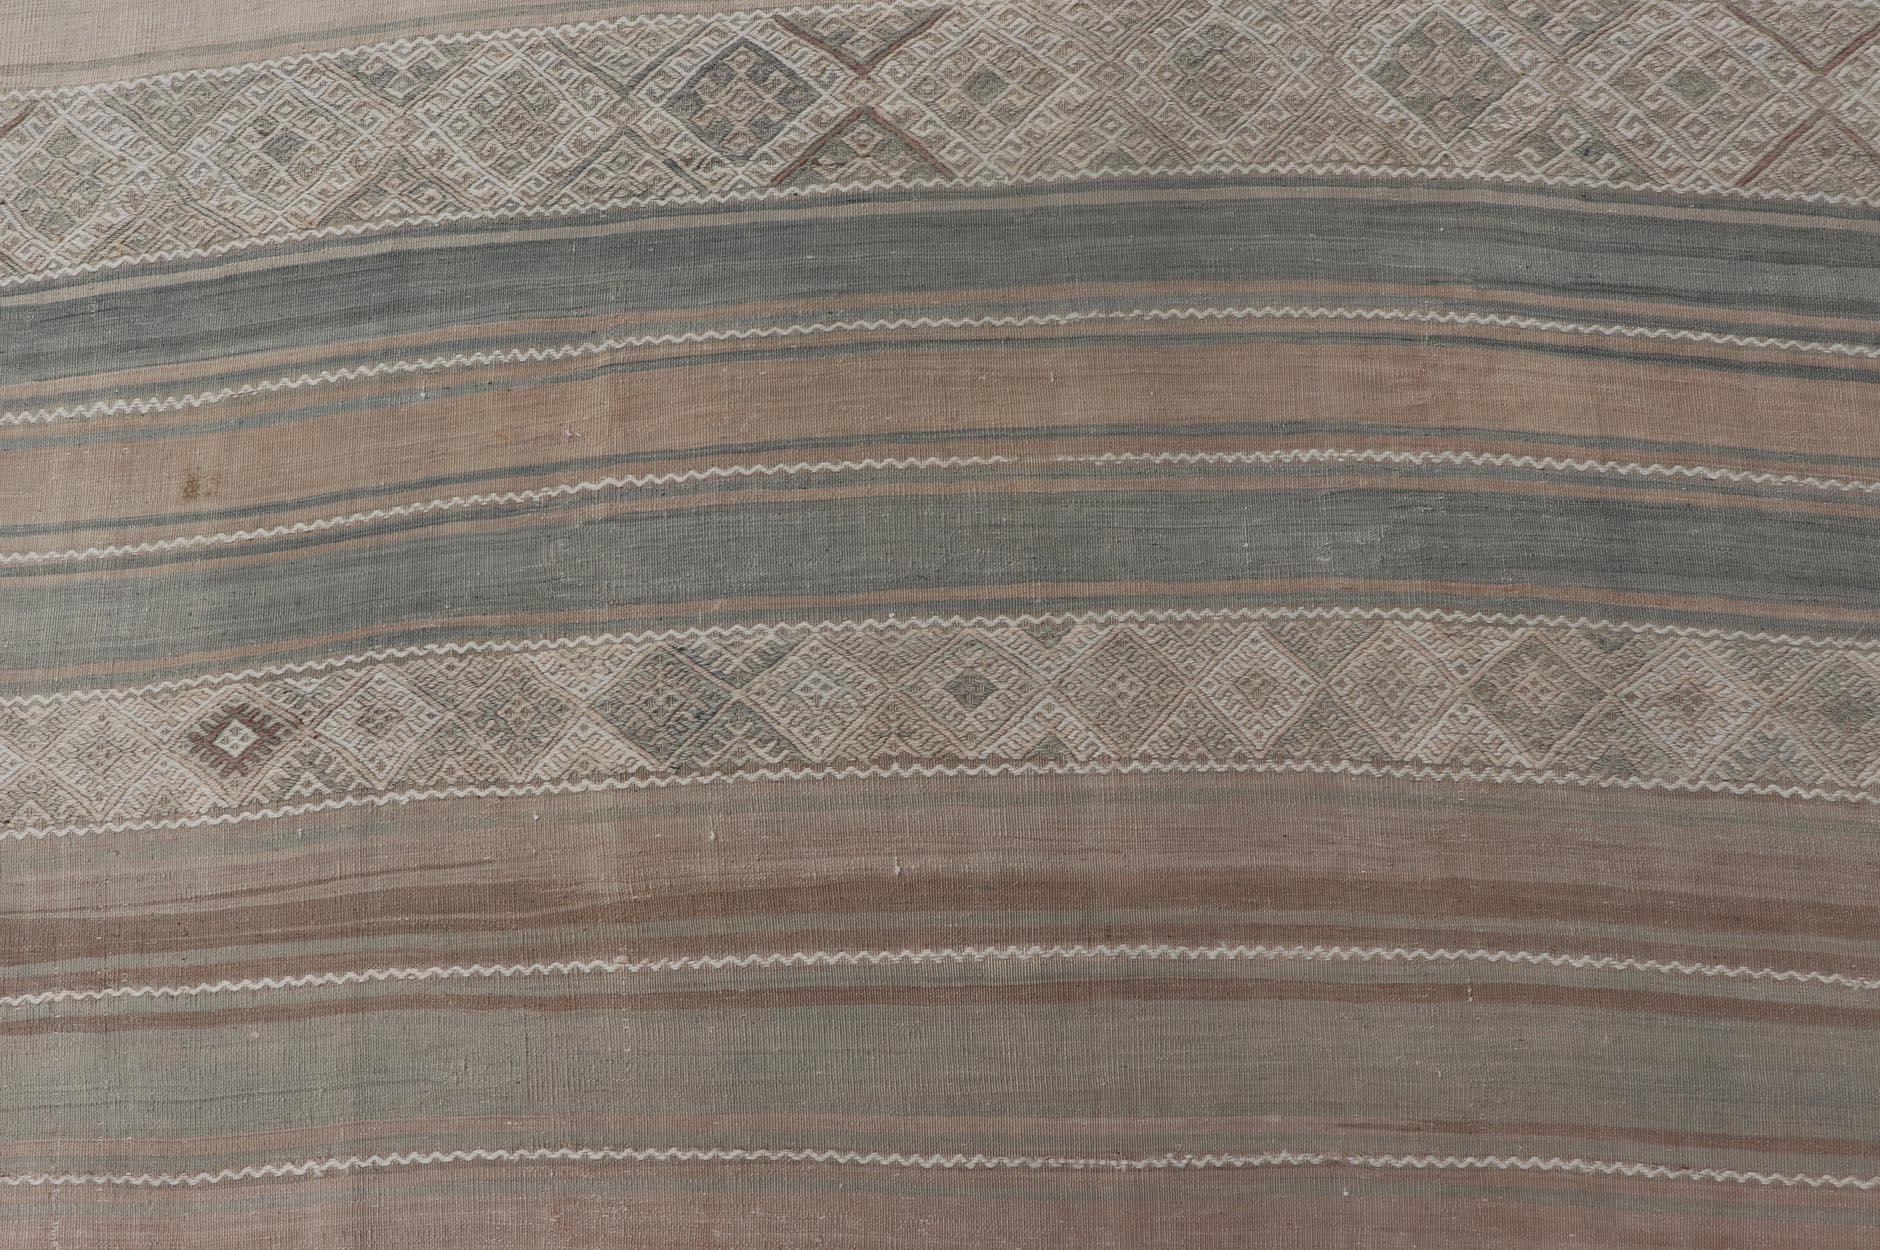 Measures: 6'10 x 14'7 

This vintage Kilim features simple design, stripes panel with stylized embroidered pattern. Rendered in muted shades of tan, taupe, light green, and faded blue makes this piece is charming. 

Country of Origin: Turkey;